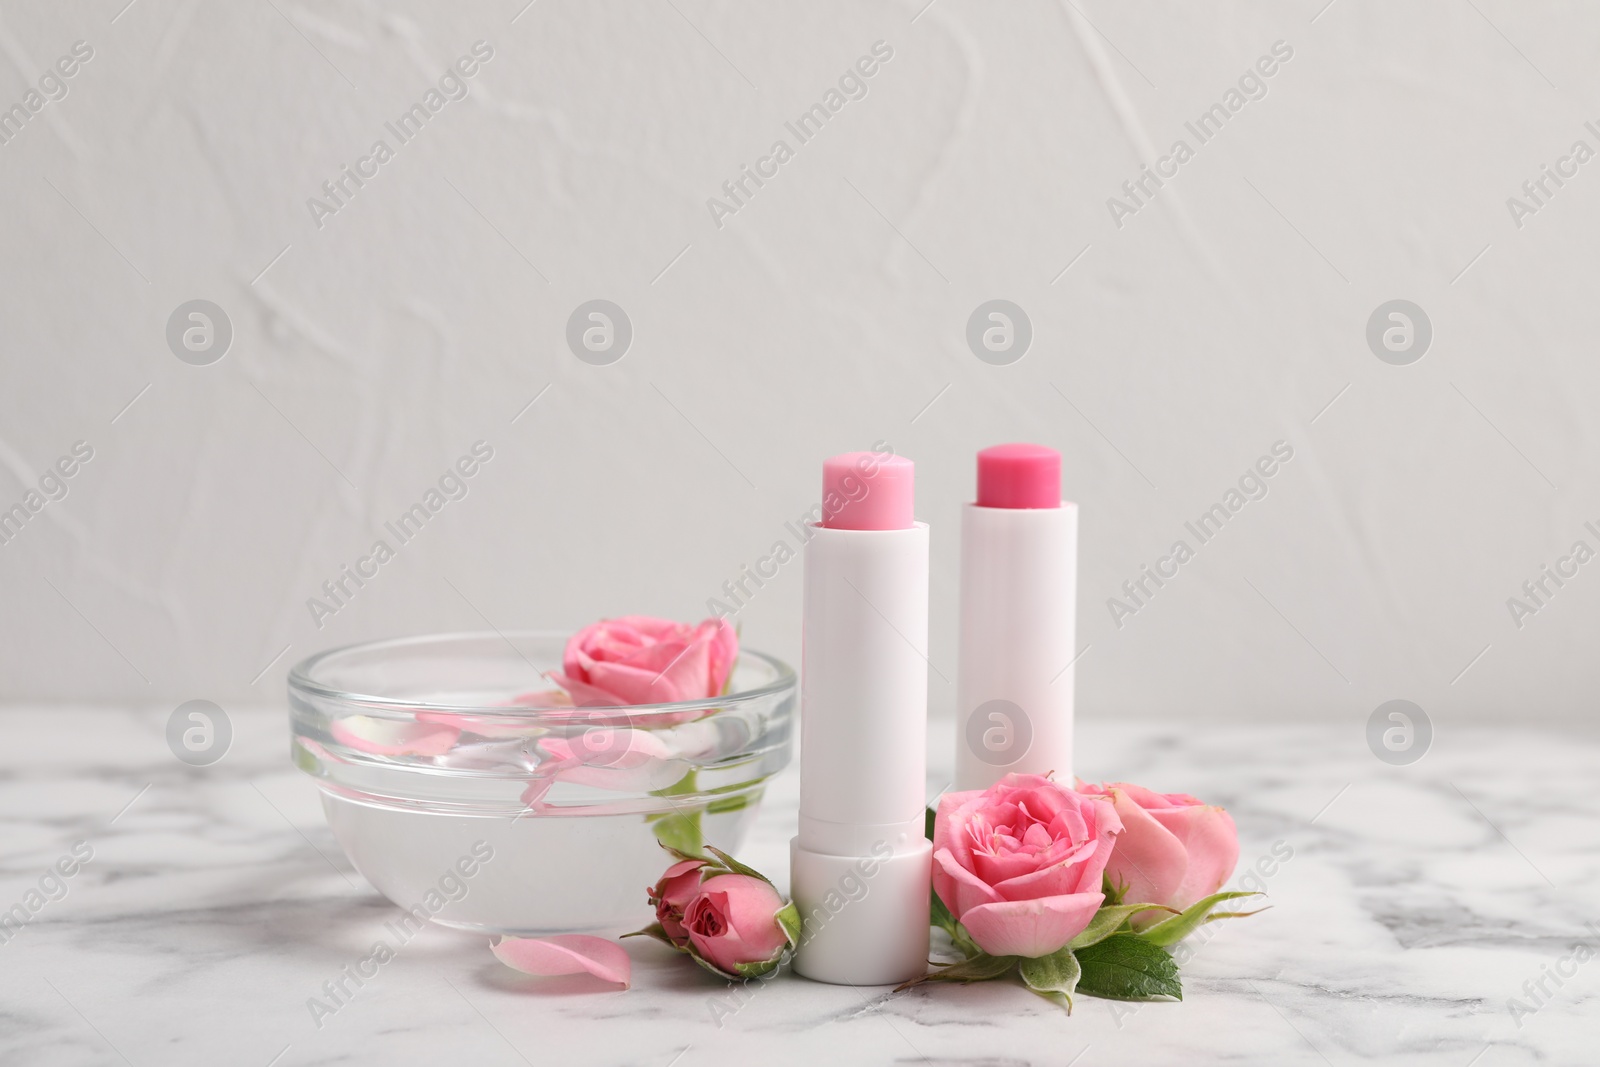 Photo of Lip balms, bowl with water and roses on white marble table, space for text